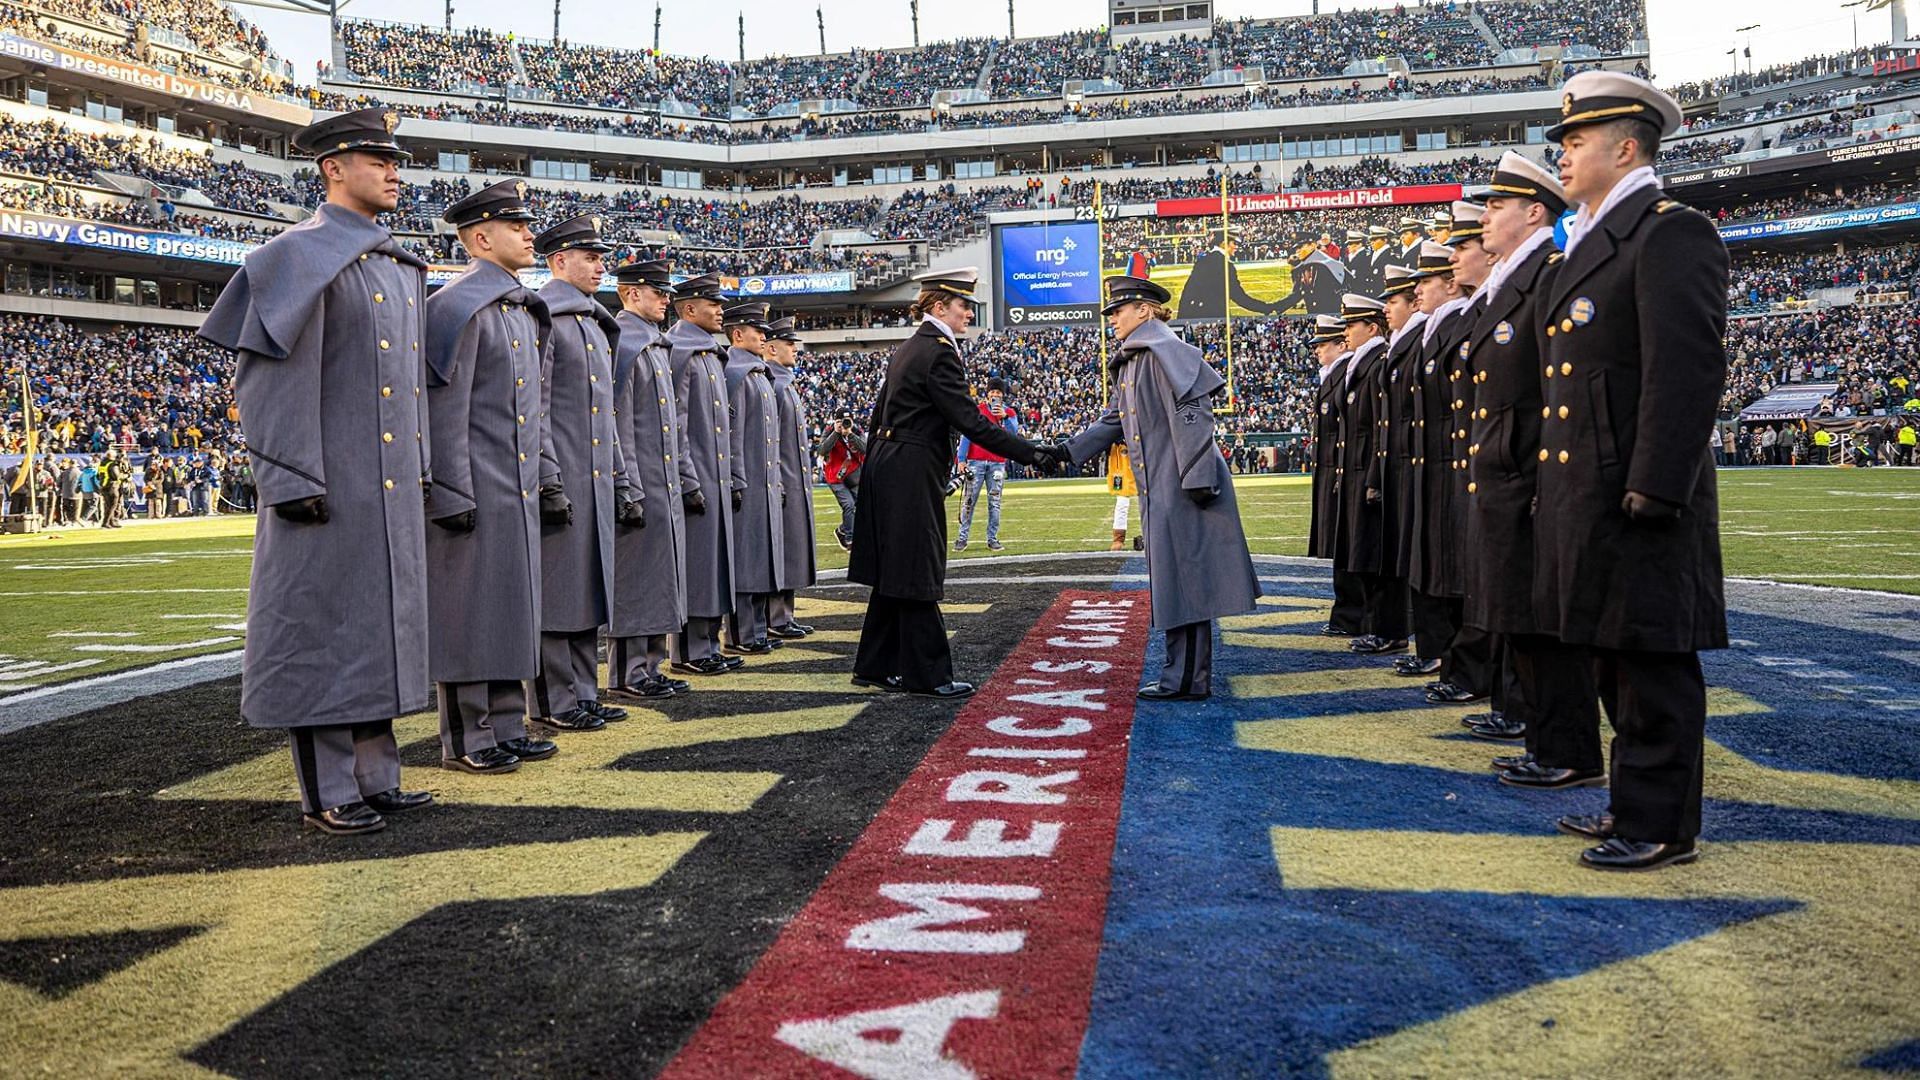 The 2023 Army-Navy game is being played at Gillette Stadium in Boston